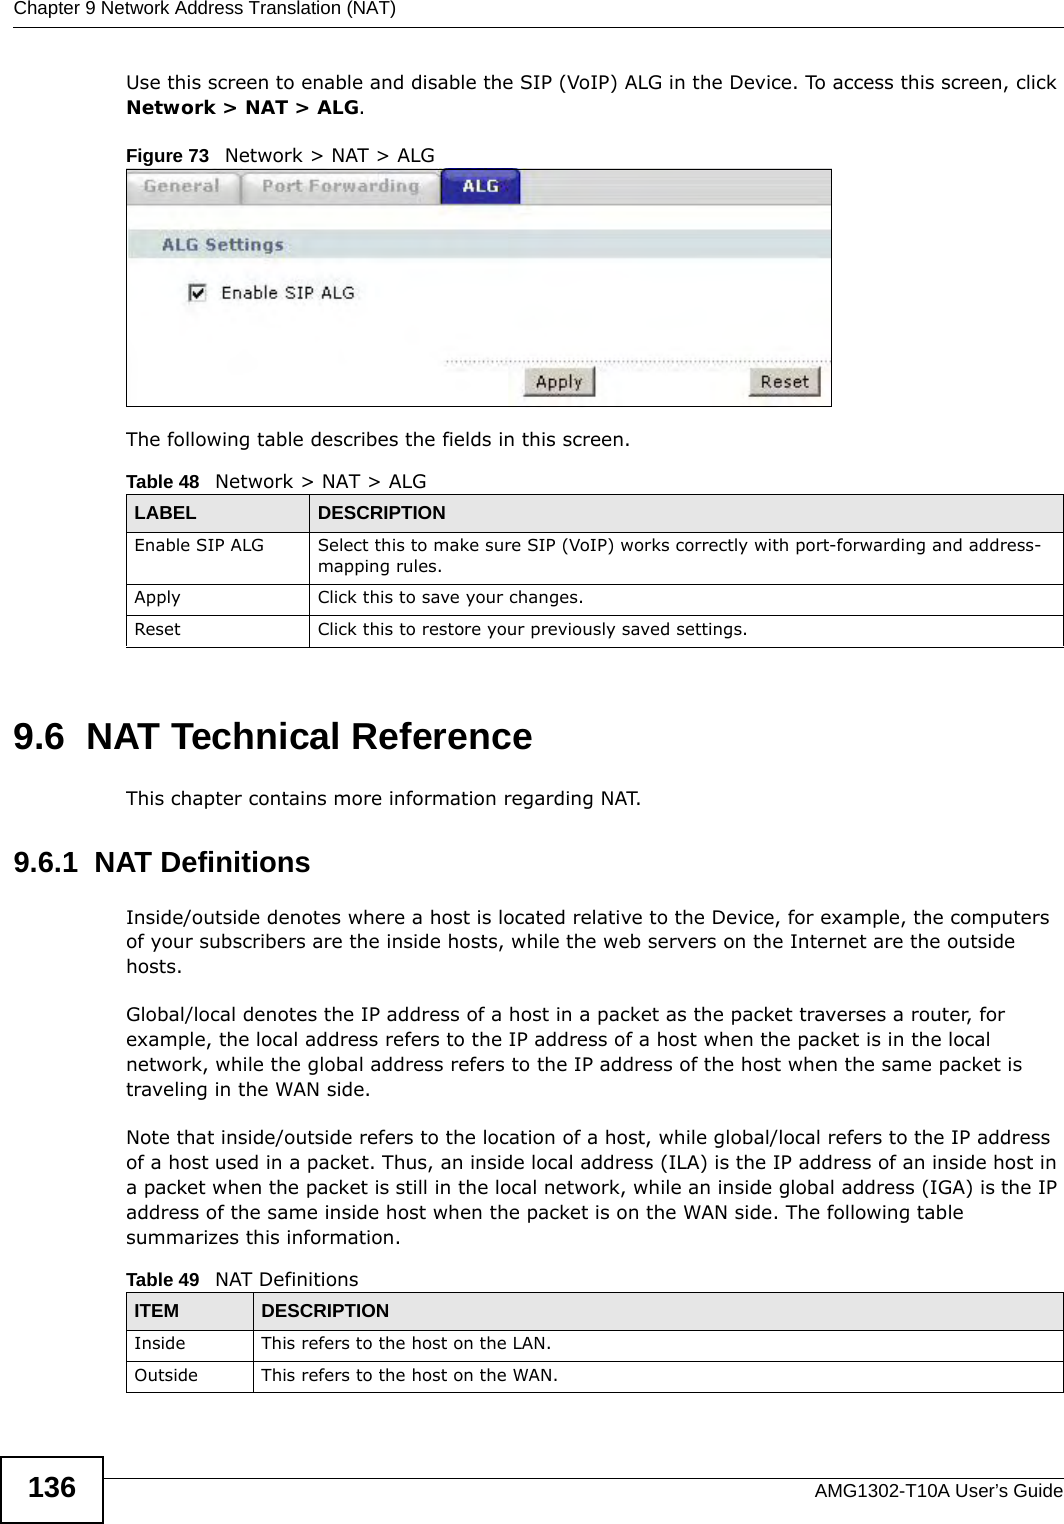 Chapter 9 Network Address Translation (NAT)AMG1302-T10A User’s Guide136Use this screen to enable and disable the SIP (VoIP) ALG in the Device. To access this screen, click Network &gt; NAT &gt; ALG.Figure 73   Network &gt; NAT &gt; ALGThe following table describes the fields in this screen.9.6  NAT Technical ReferenceThis chapter contains more information regarding NAT.9.6.1  NAT DefinitionsInside/outside denotes where a host is located relative to the Device, for example, the computers of your subscribers are the inside hosts, while the web servers on the Internet are the outside hosts. Global/local denotes the IP address of a host in a packet as the packet traverses a router, for example, the local address refers to the IP address of a host when the packet is in the local network, while the global address refers to the IP address of the host when the same packet is traveling in the WAN side. Note that inside/outside refers to the location of a host, while global/local refers to the IP address of a host used in a packet. Thus, an inside local address (ILA) is the IP address of an inside host in a packet when the packet is still in the local network, while an inside global address (IGA) is the IP address of the same inside host when the packet is on the WAN side. The following table summarizes this information.Table 48   Network &gt; NAT &gt; ALGLABEL DESCRIPTIONEnable SIP ALG Select this to make sure SIP (VoIP) works correctly with port-forwarding and address-mapping rules.Apply Click this to save your changes.Reset Click this to restore your previously saved settings.Table 49   NAT DefinitionsITEM DESCRIPTIONInside This refers to the host on the LAN.Outside This refers to the host on the WAN.